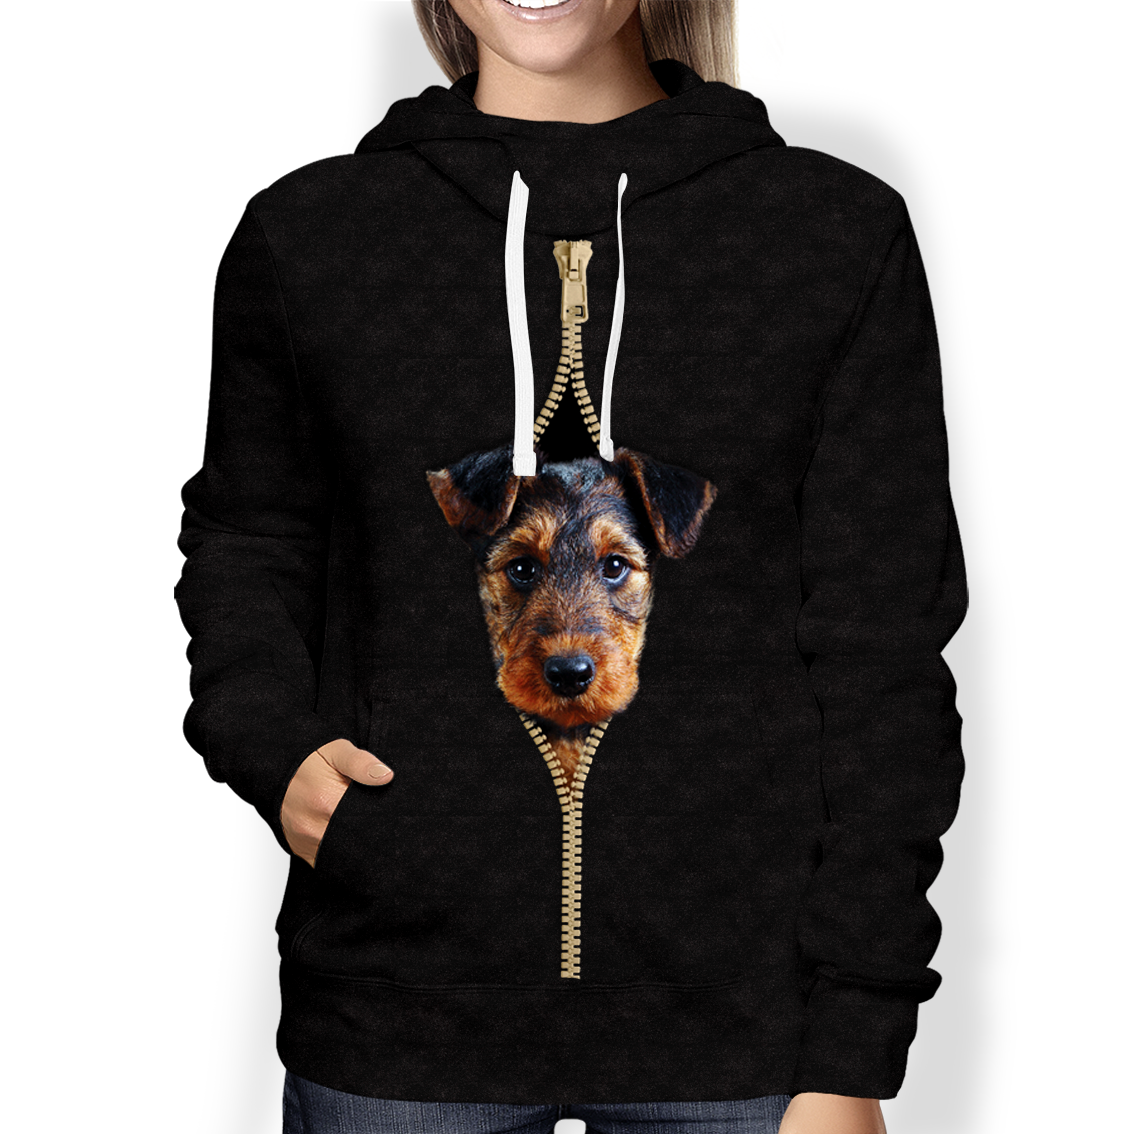 I'm With You - Airedale Terrier Hoodie V2